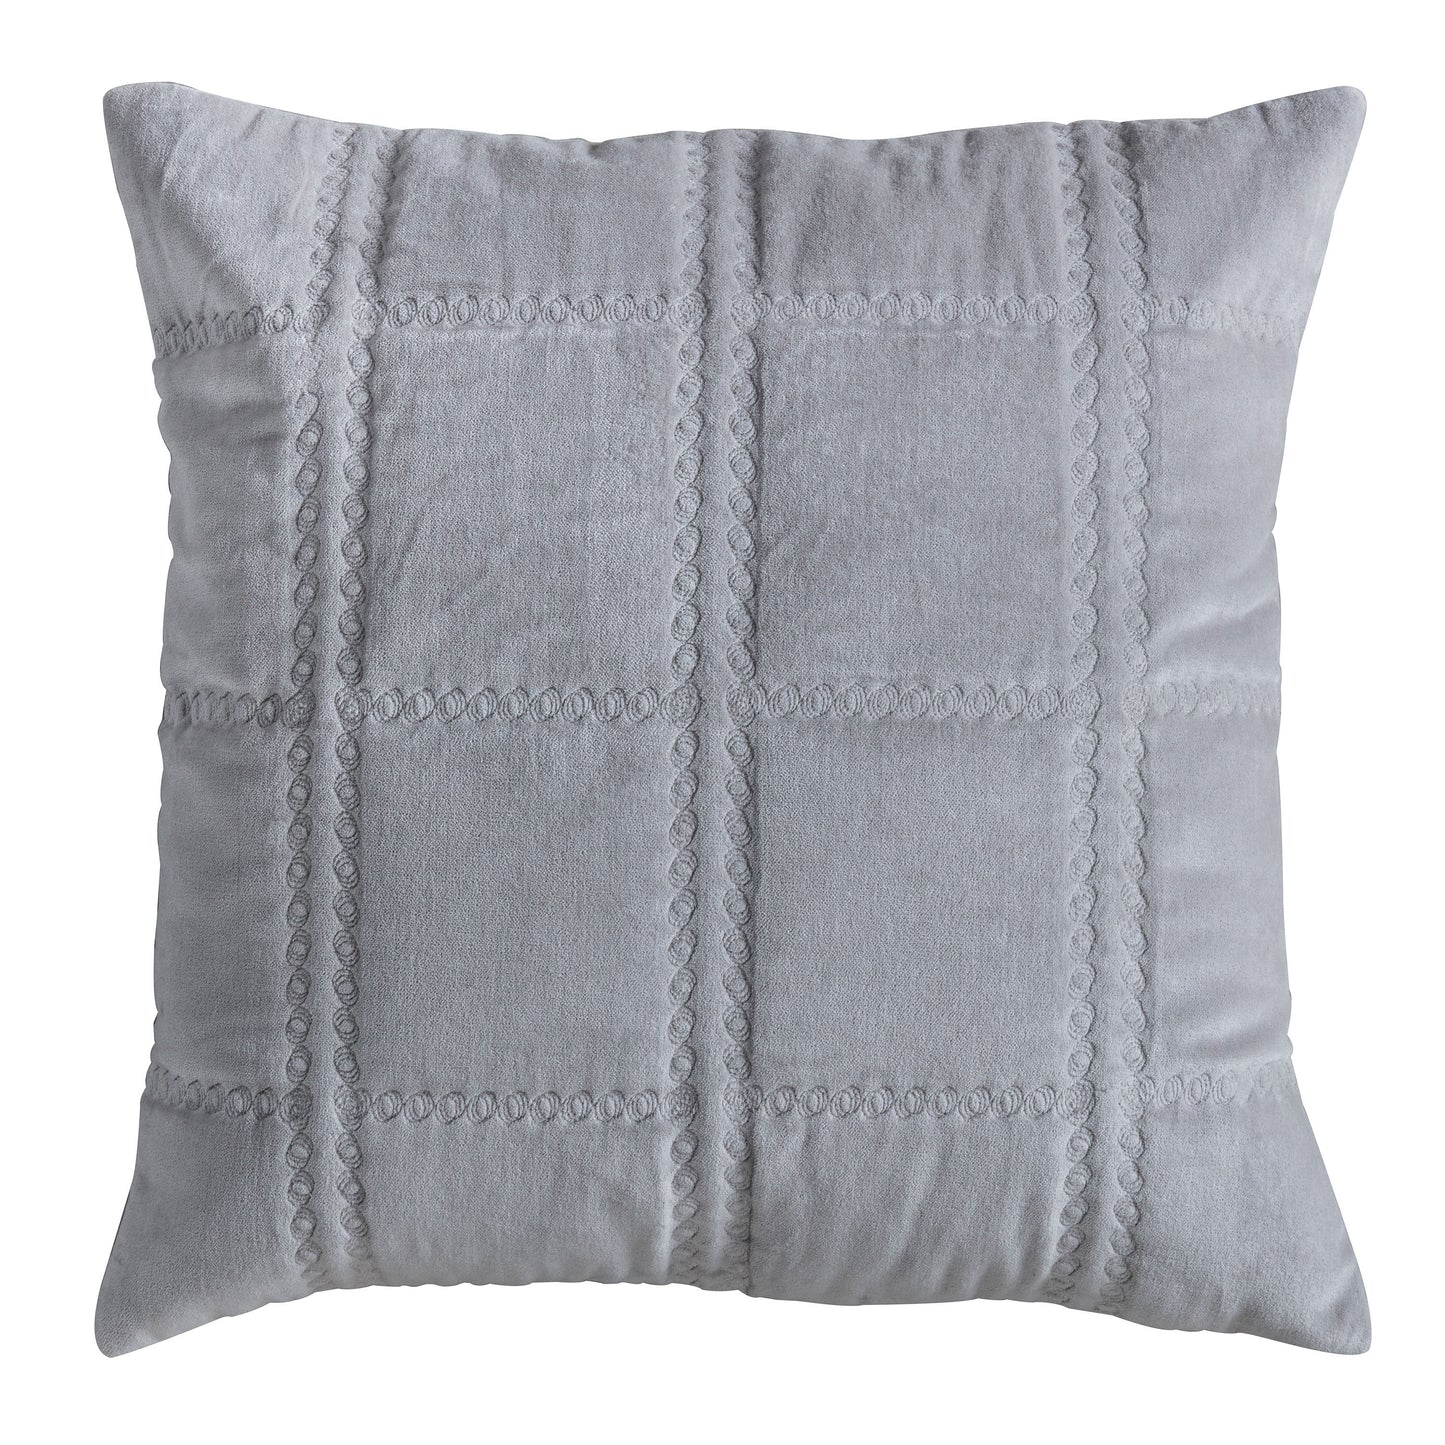 A Quilted Cotton Velvet Cushion Grey 450x450mm by Kikiathome.co.uk, perfect for home furniture and interior decor.